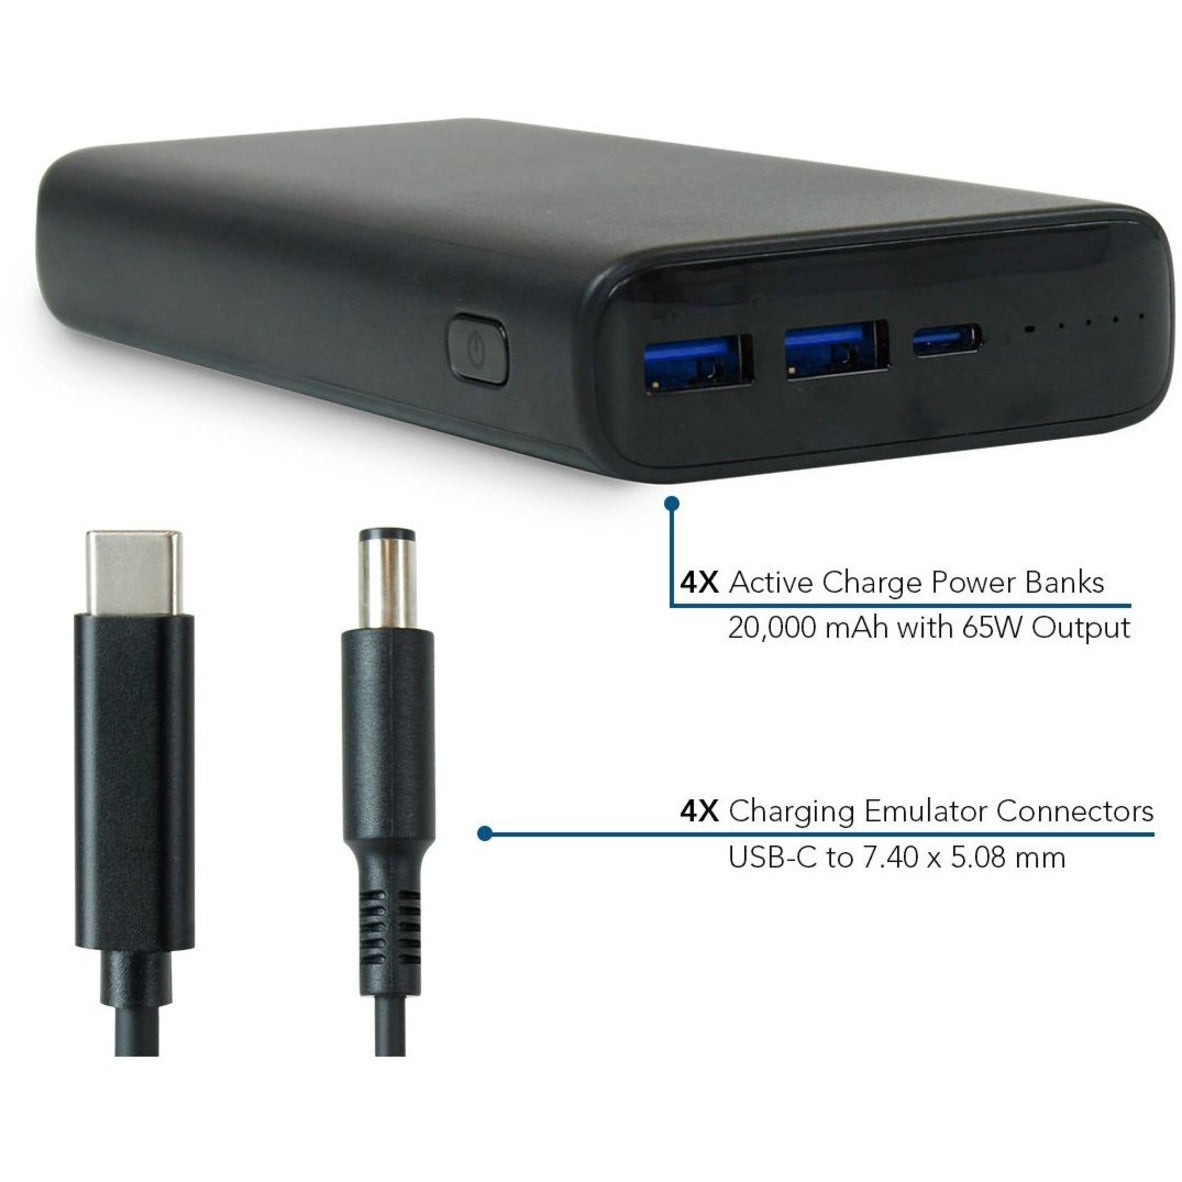 JAR Systems A4USBC2YPBC11 Adapt4 USB-C Charging Station Active Charge Upgrade with Dell Connectors, Chromebooks, Notebooks, Tablets